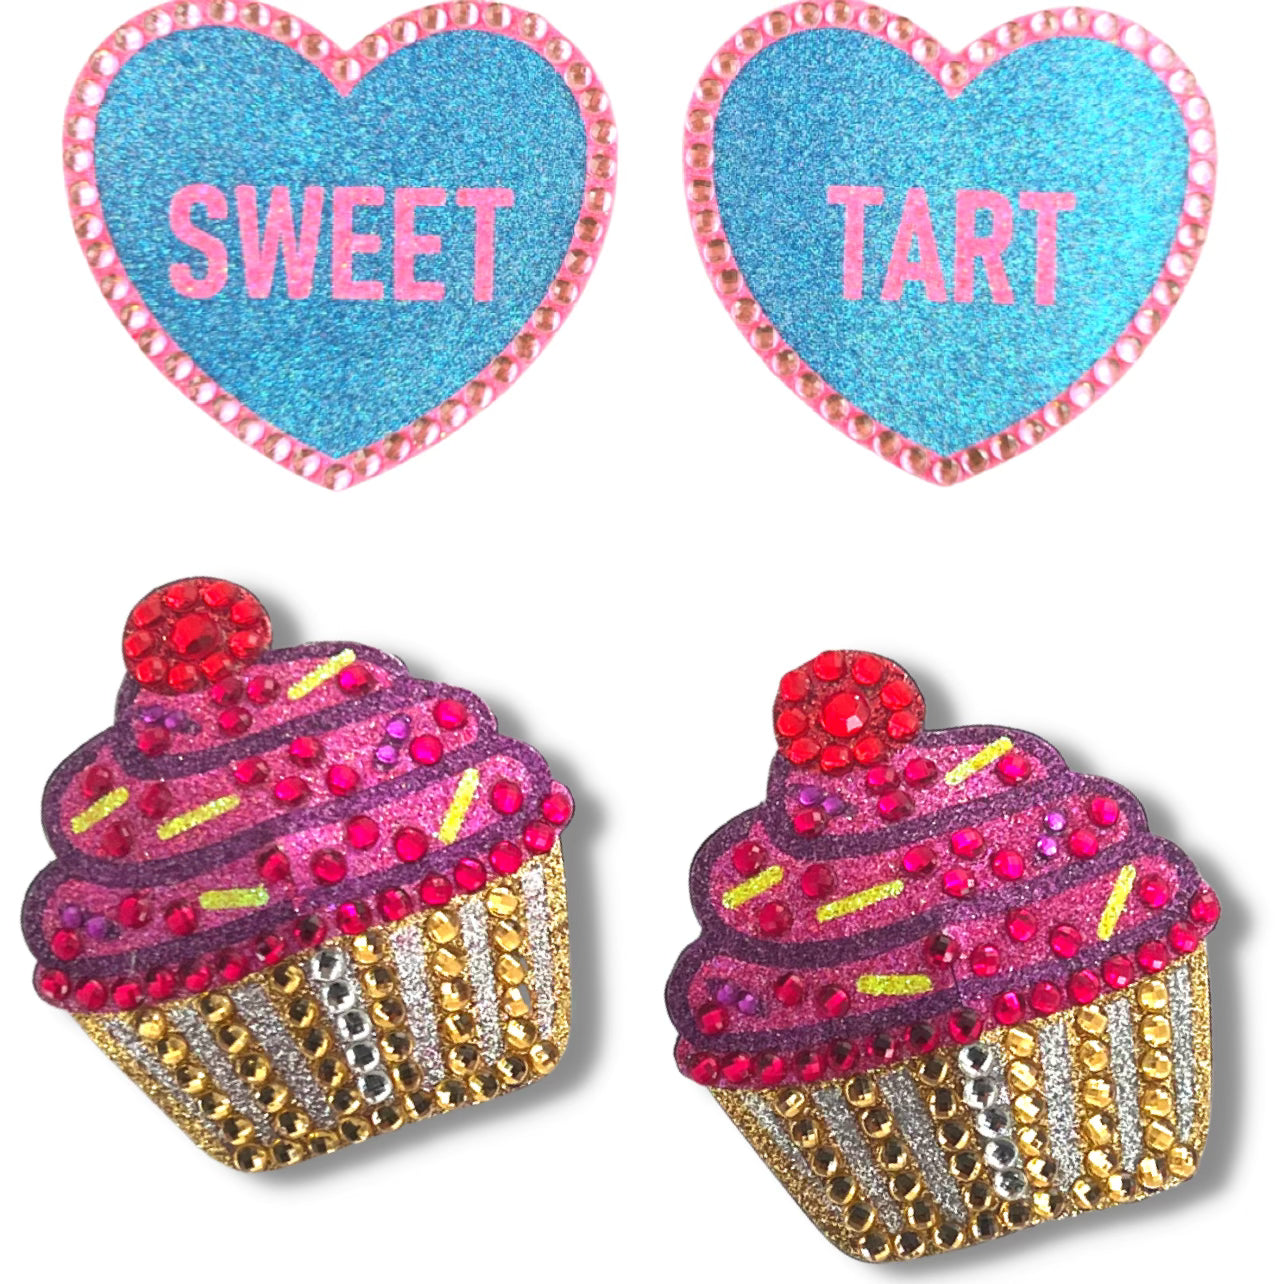 Sweet & Sassy 2 Pairs Cupcake and Hearts Nipple Pastie Bunde (4 pcs) for Lingerie Burlesque Valentines Day Festivals Birthday